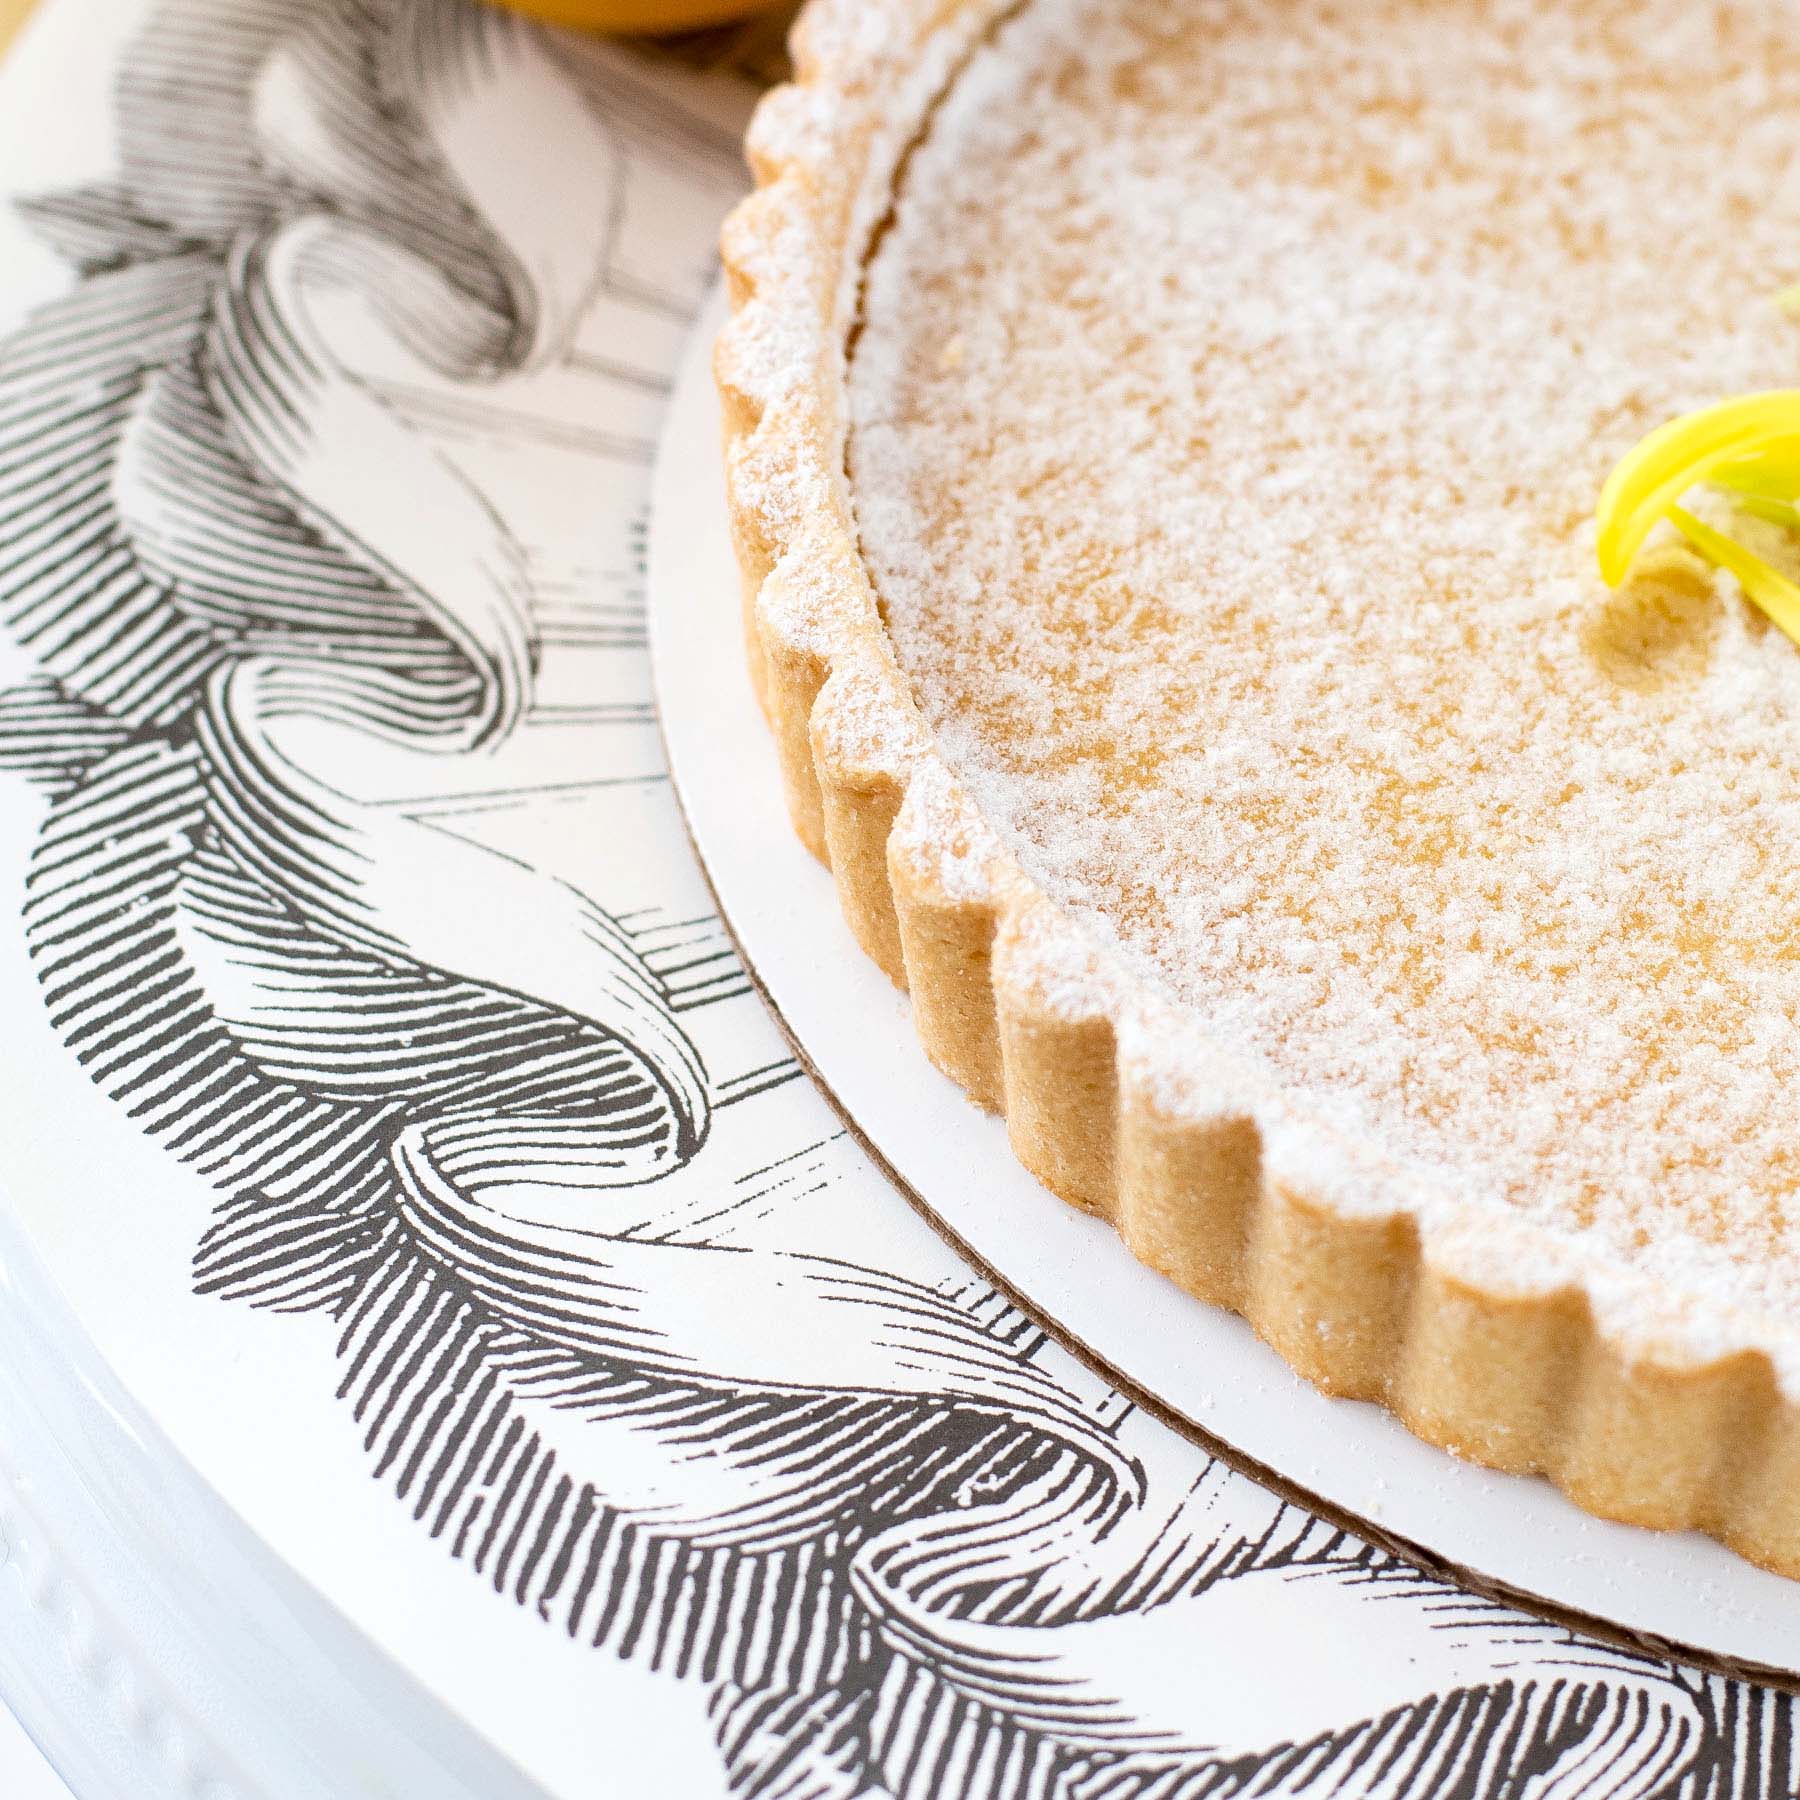 A Rosette Serving Papers lemon tart on a plate by Hester &amp; Cook.